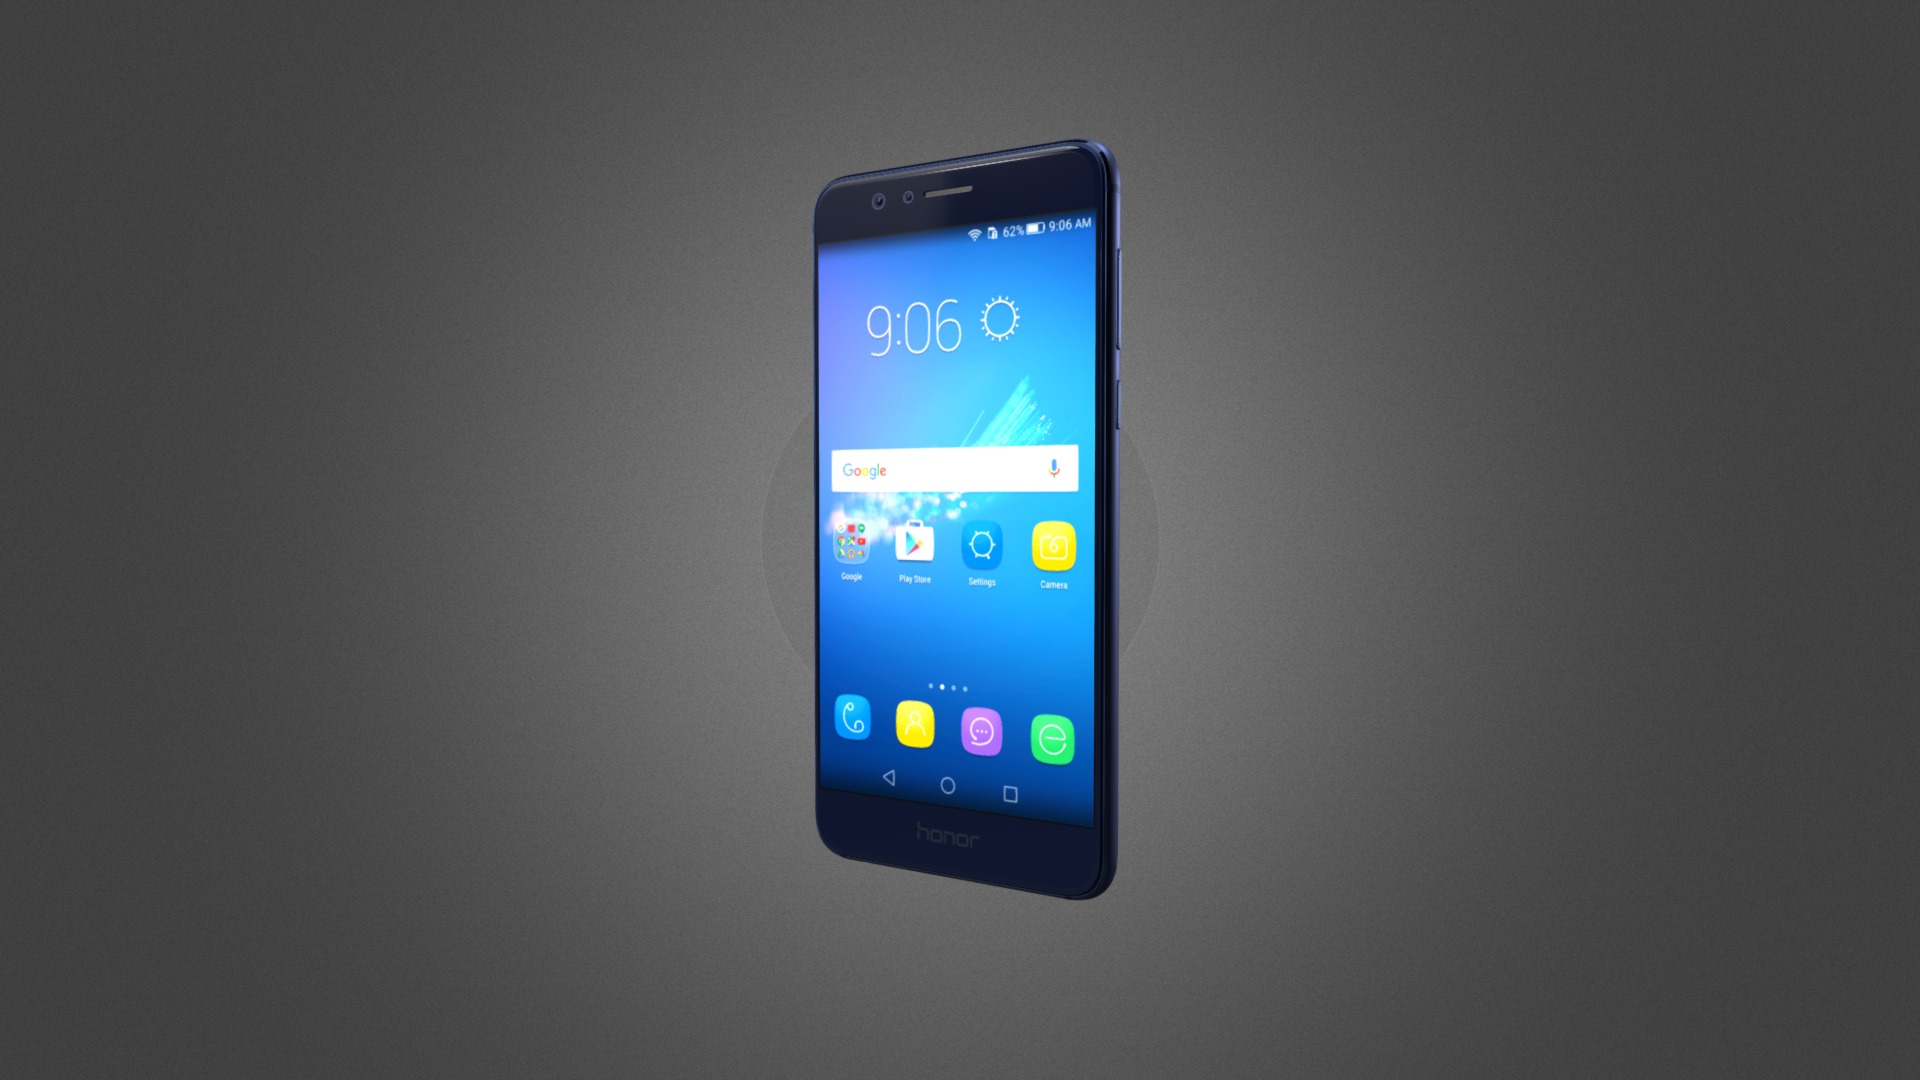 3D model Huawei Honor 8 for Element 3D - This is a 3D model of the Huawei Honor 8 for Element 3D. The 3D model is about a black smartphone with a blue screen.